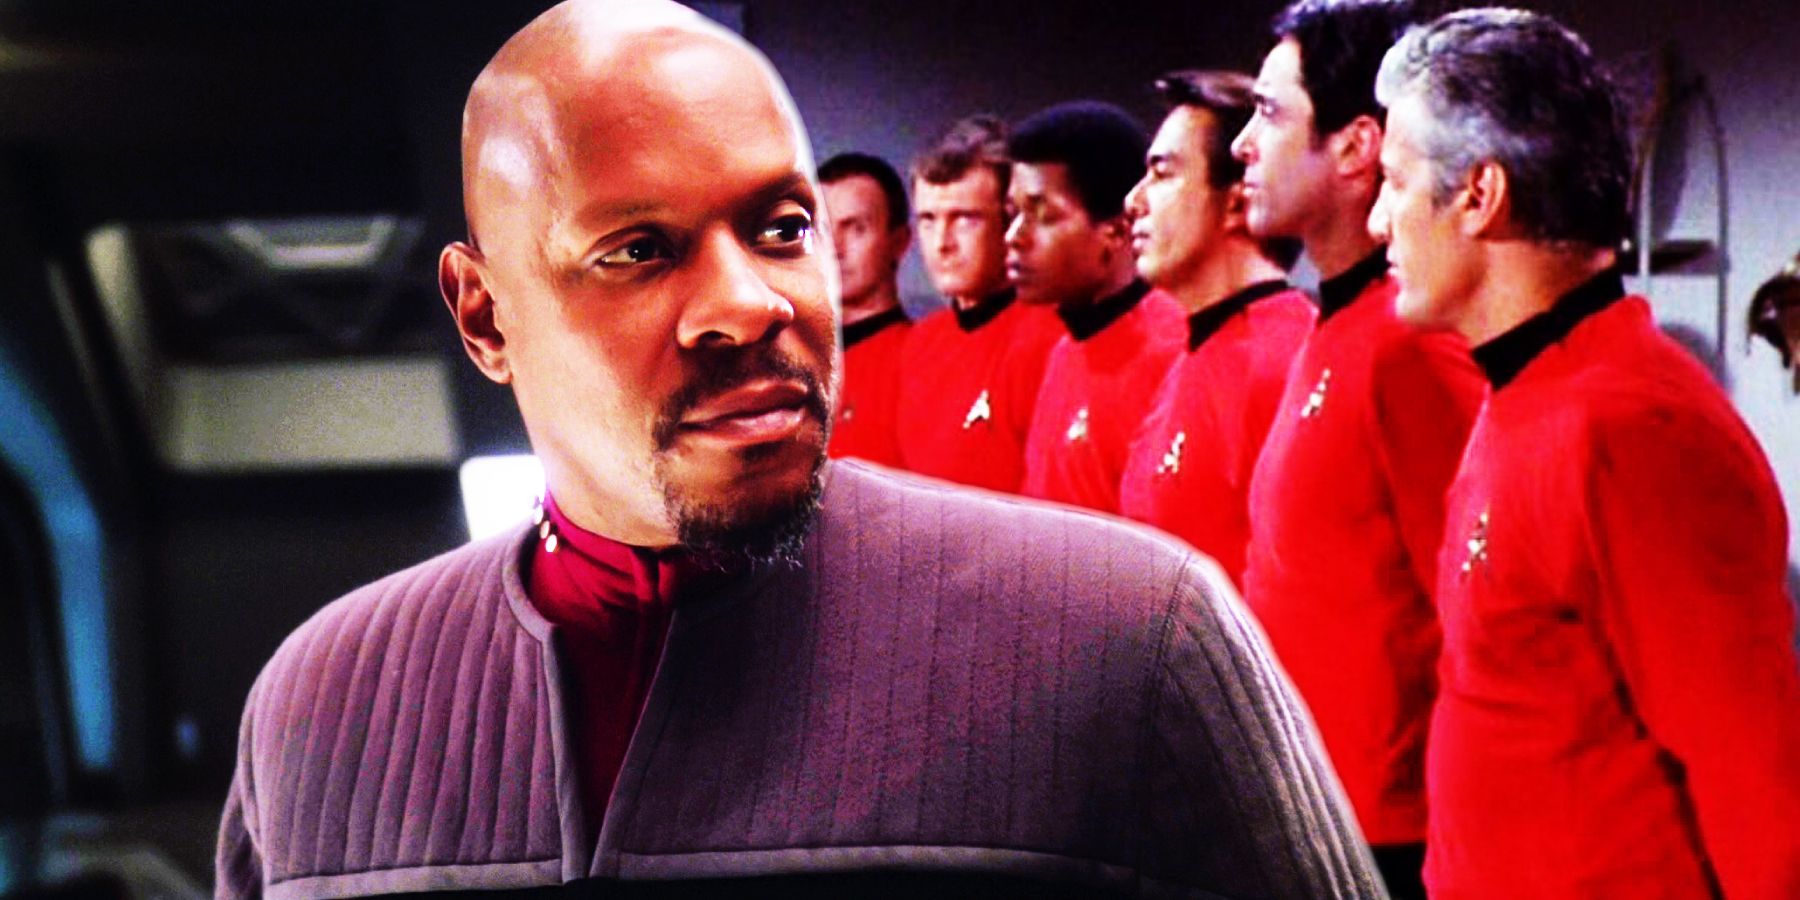 DS9's Captain Sisko and a row of red shirted officers from Star Trek: TOS